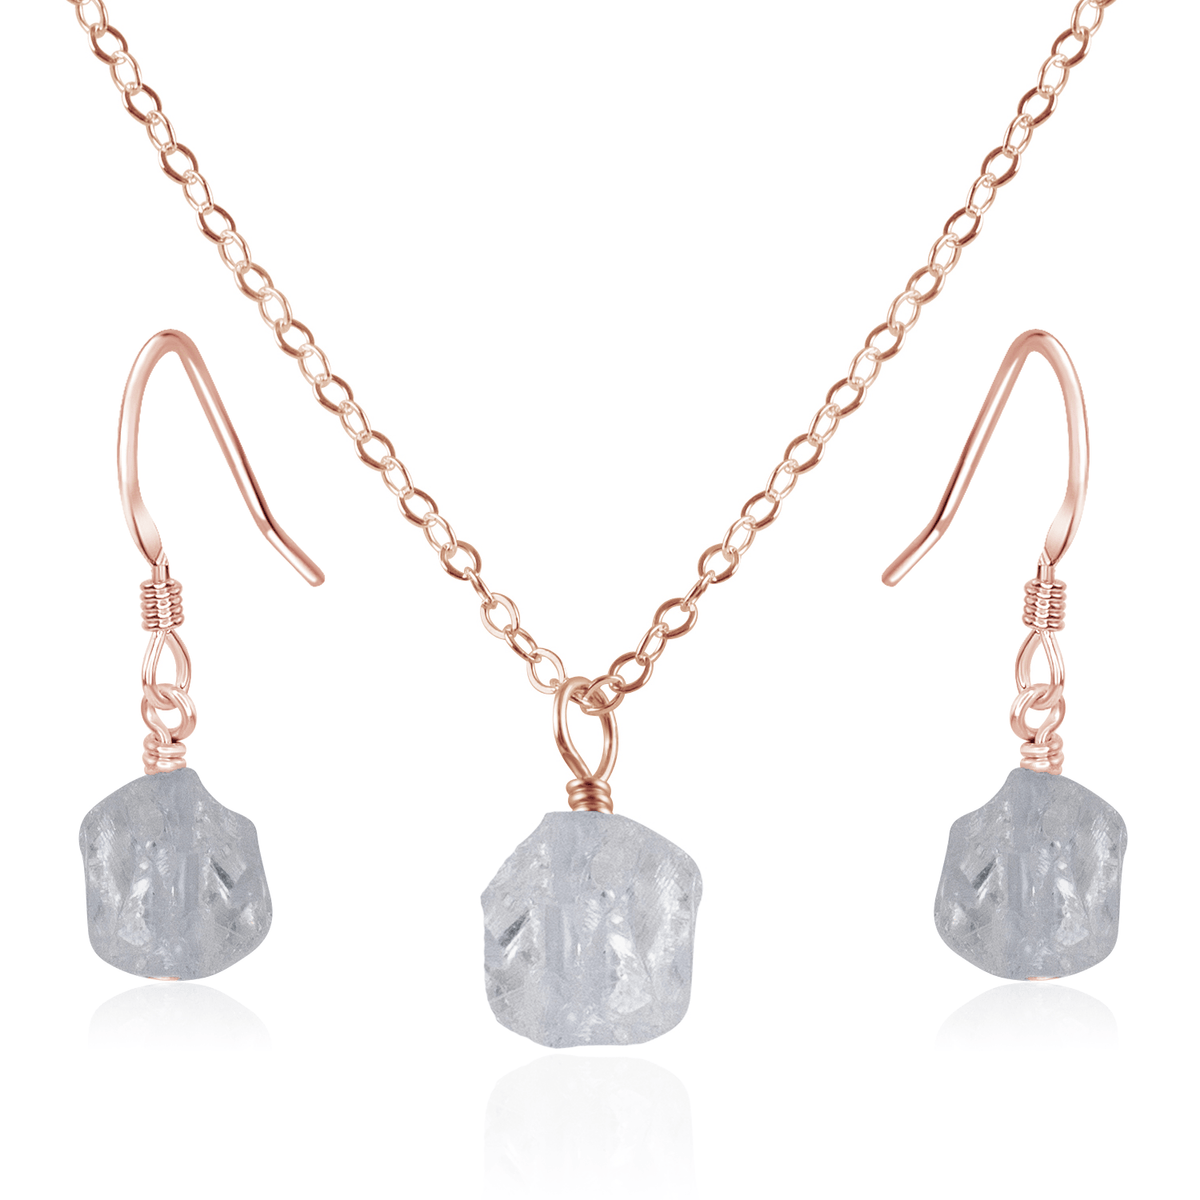 Raw Crystal Quartz Crystal Earrings & Necklace Set - Raw Crystal Quartz Crystal Earrings & Necklace Set - 14k Rose Gold Fill / Cable - Luna Tide Handmade Crystal Jewellery